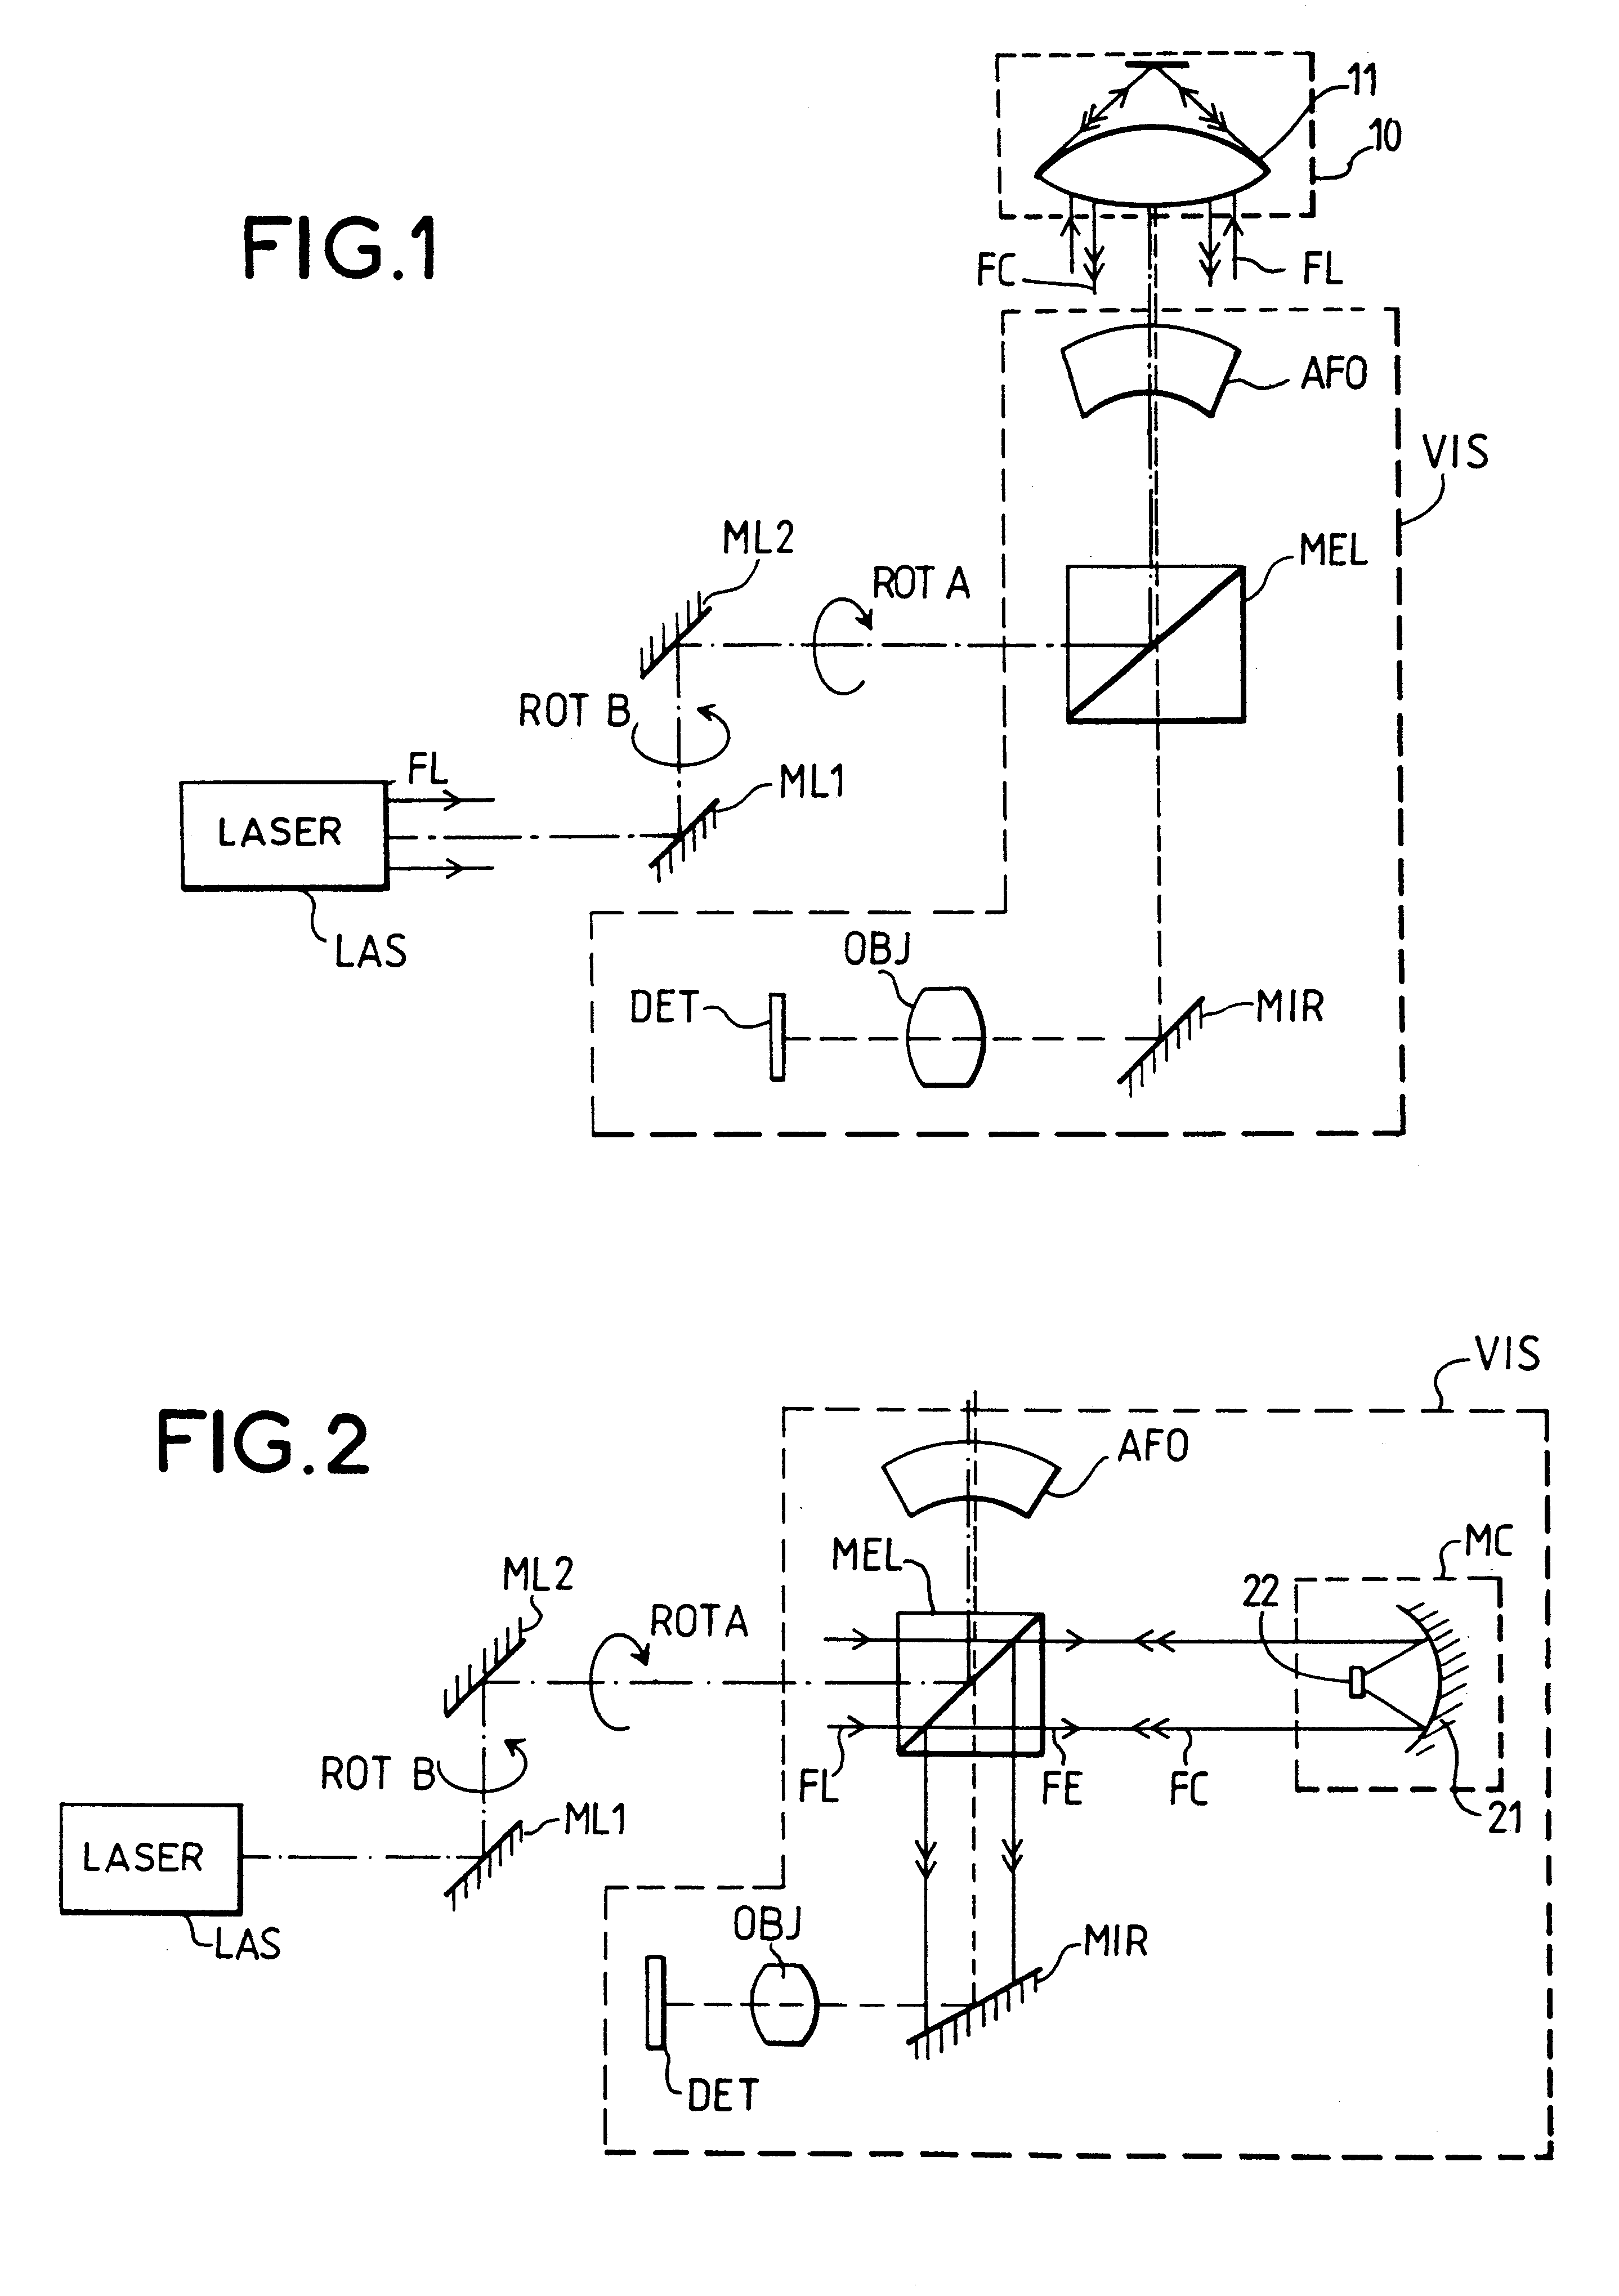 Device for harmonizing a laser emission path with a passive observation path